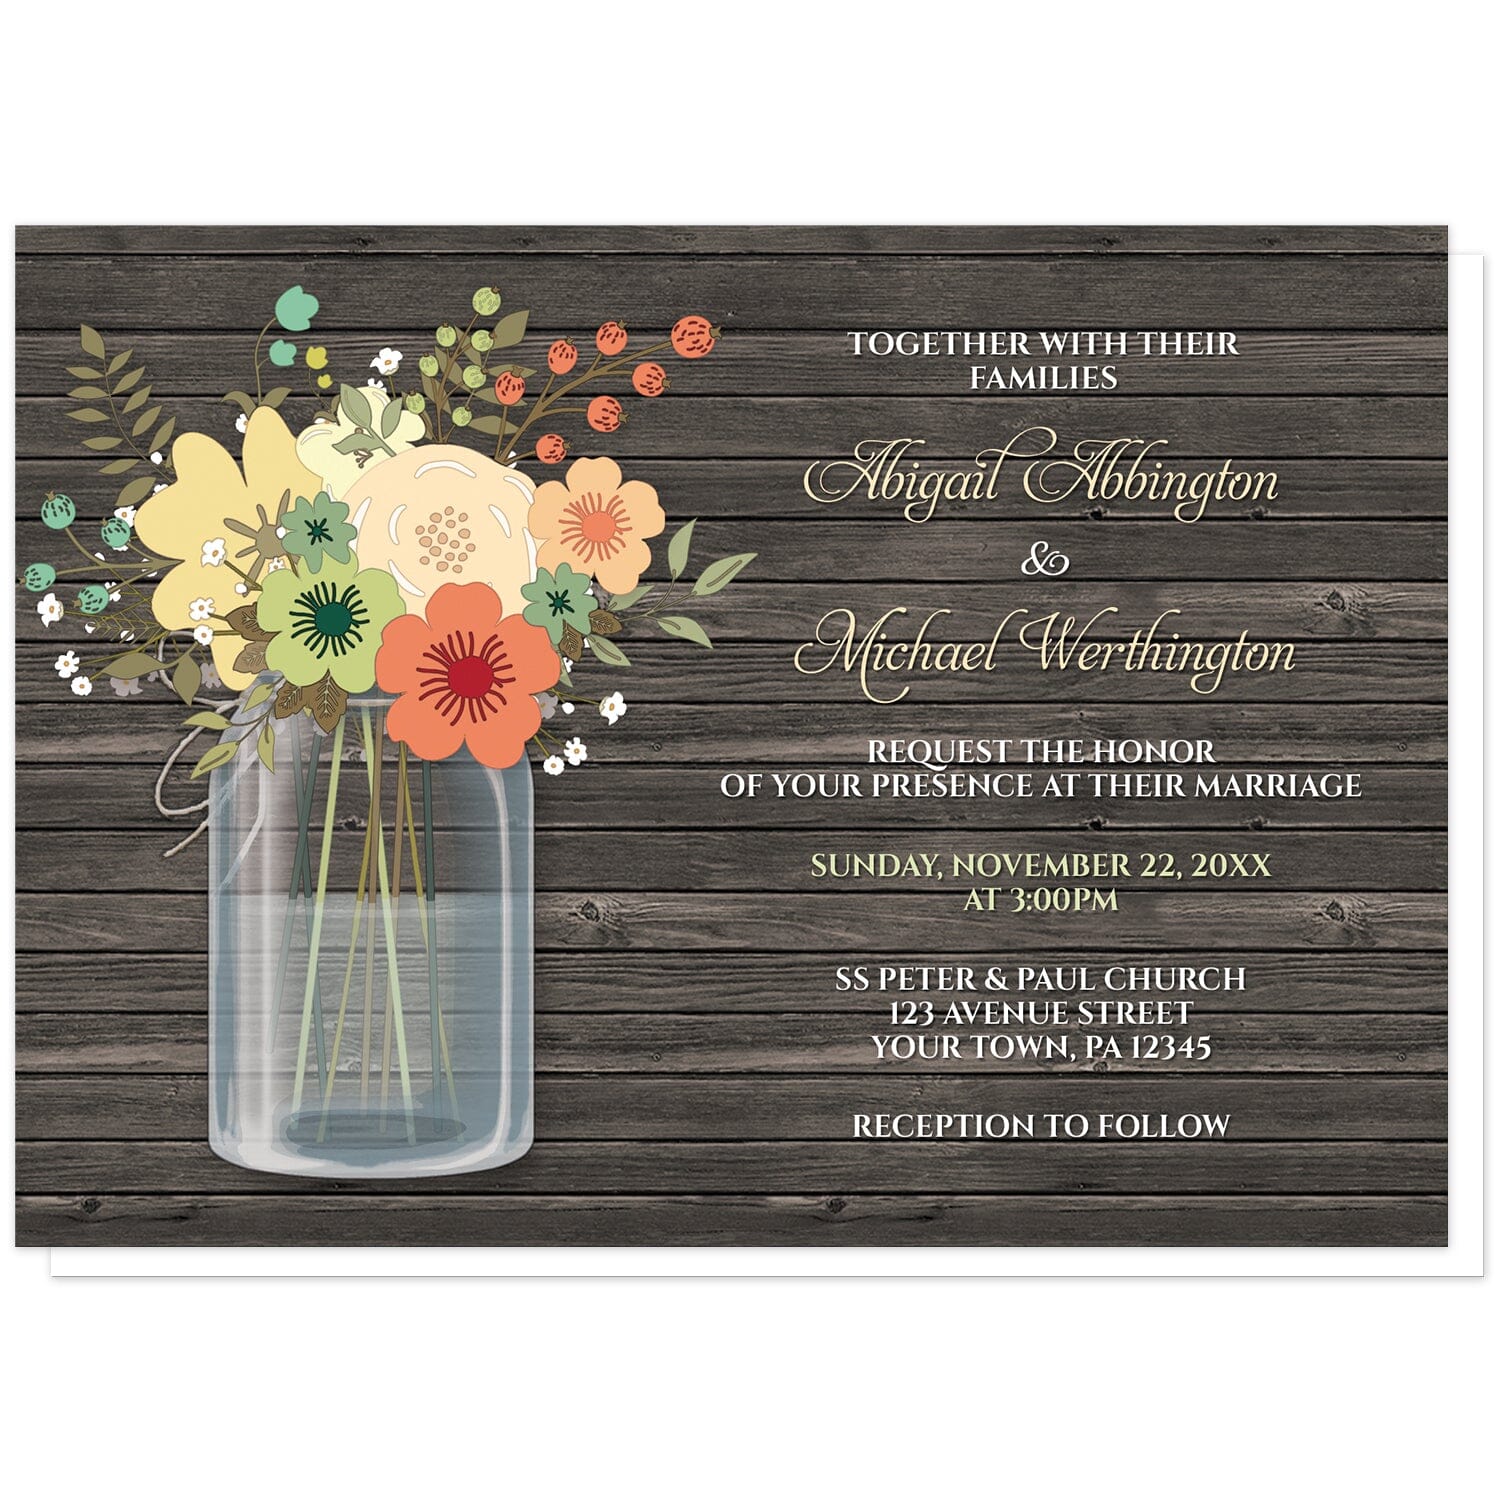 Rustic Floral Wood Mason Jar Wedding Invitations at Artistically Invited. Rustic floral wood mason jar wedding invitations with a pretty orange and teal floral mason jar theme with yellow, beige, and green accent flowers. Your personalized marriage celebration details are custom printed in beige, green, and white over a dark brown rustic wood pattern background next to the mason jar illustration, in both script and all-capital letters fonts.